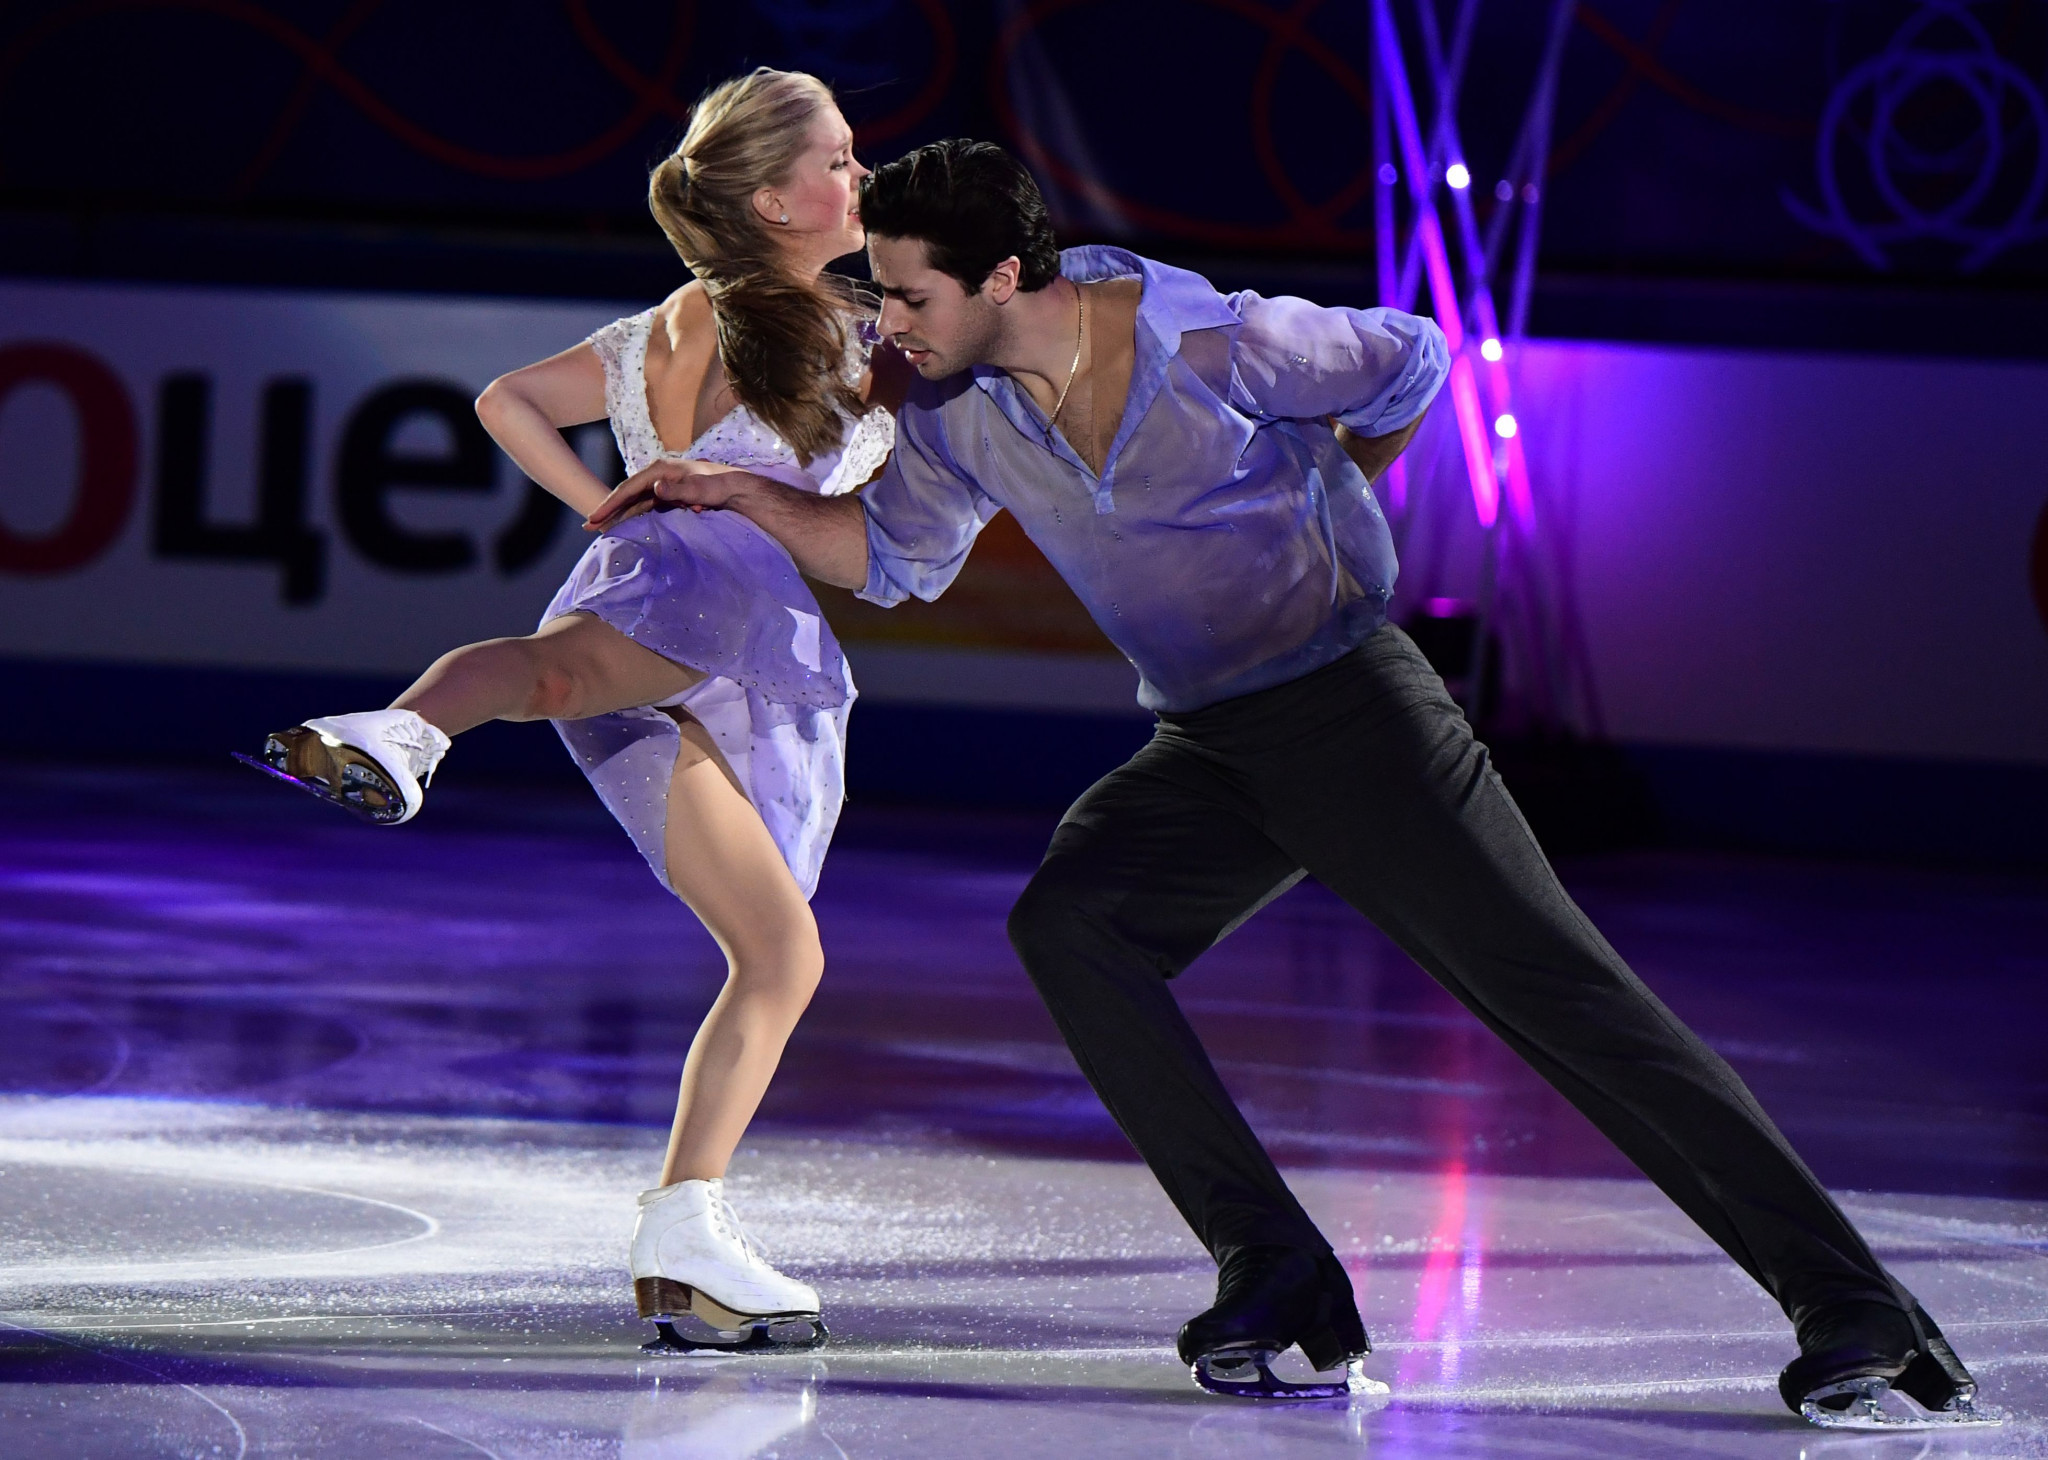 Andrew Poje and Kaitlyn Weaver have announced that they will skip the entirety of the 2018 International Skating Union Grand Prix of Figure Skating circuit ©Getty Images